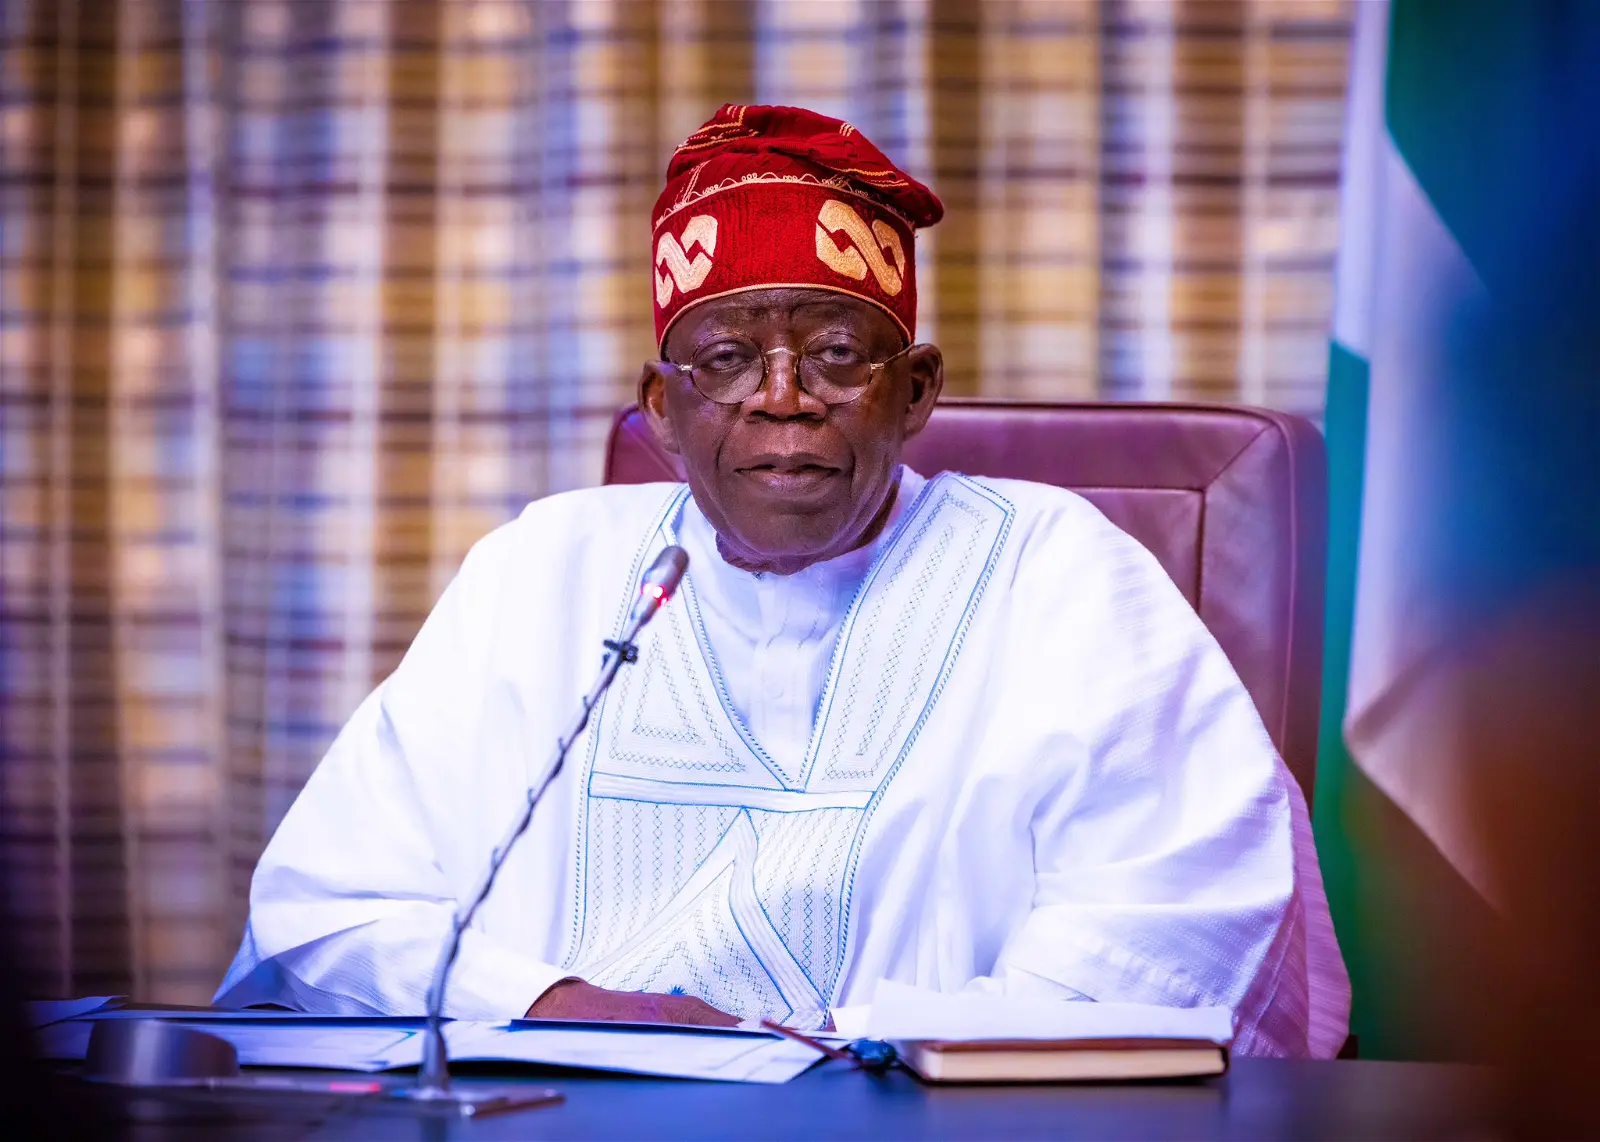 Strike Action: I Need More Time to Meet Demands, Tinubu Tell Workers